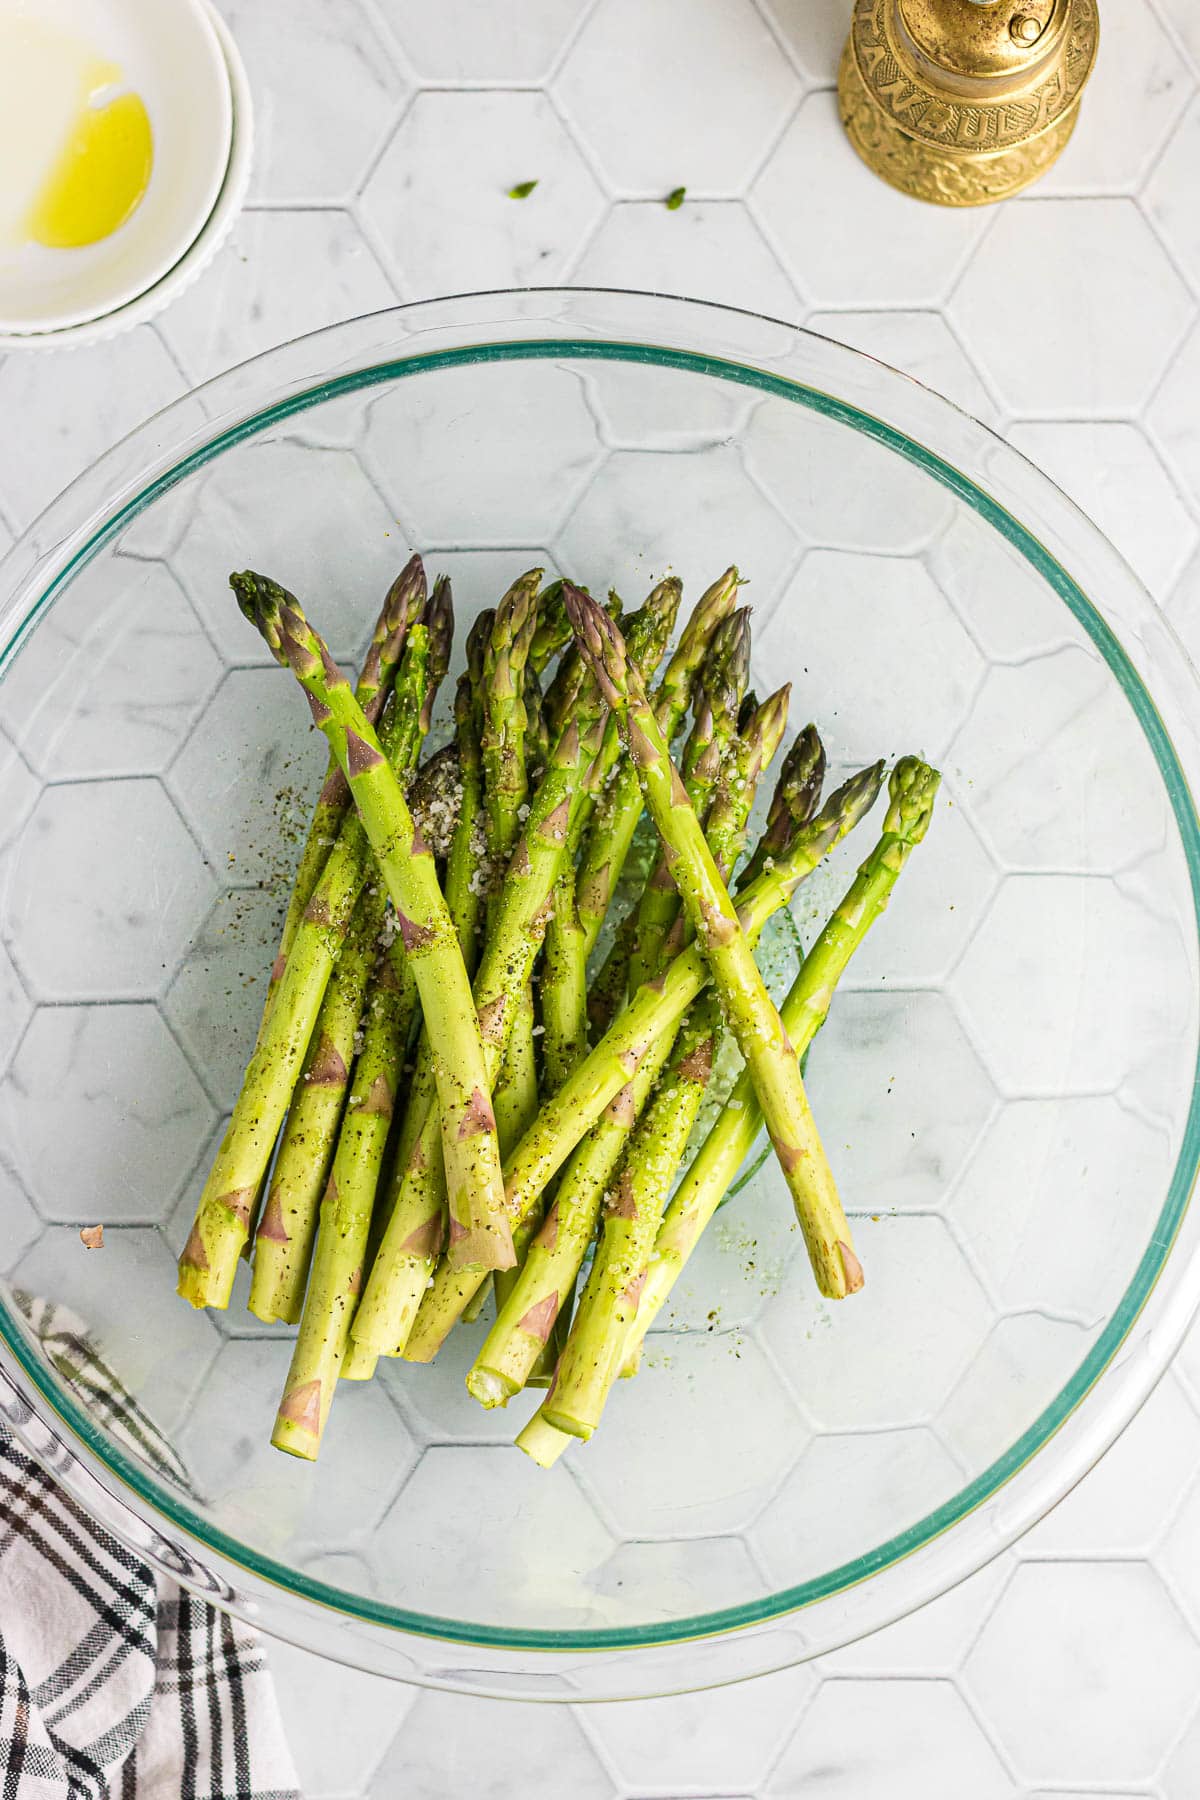 A glass bowl filled with raw asparagus spears.